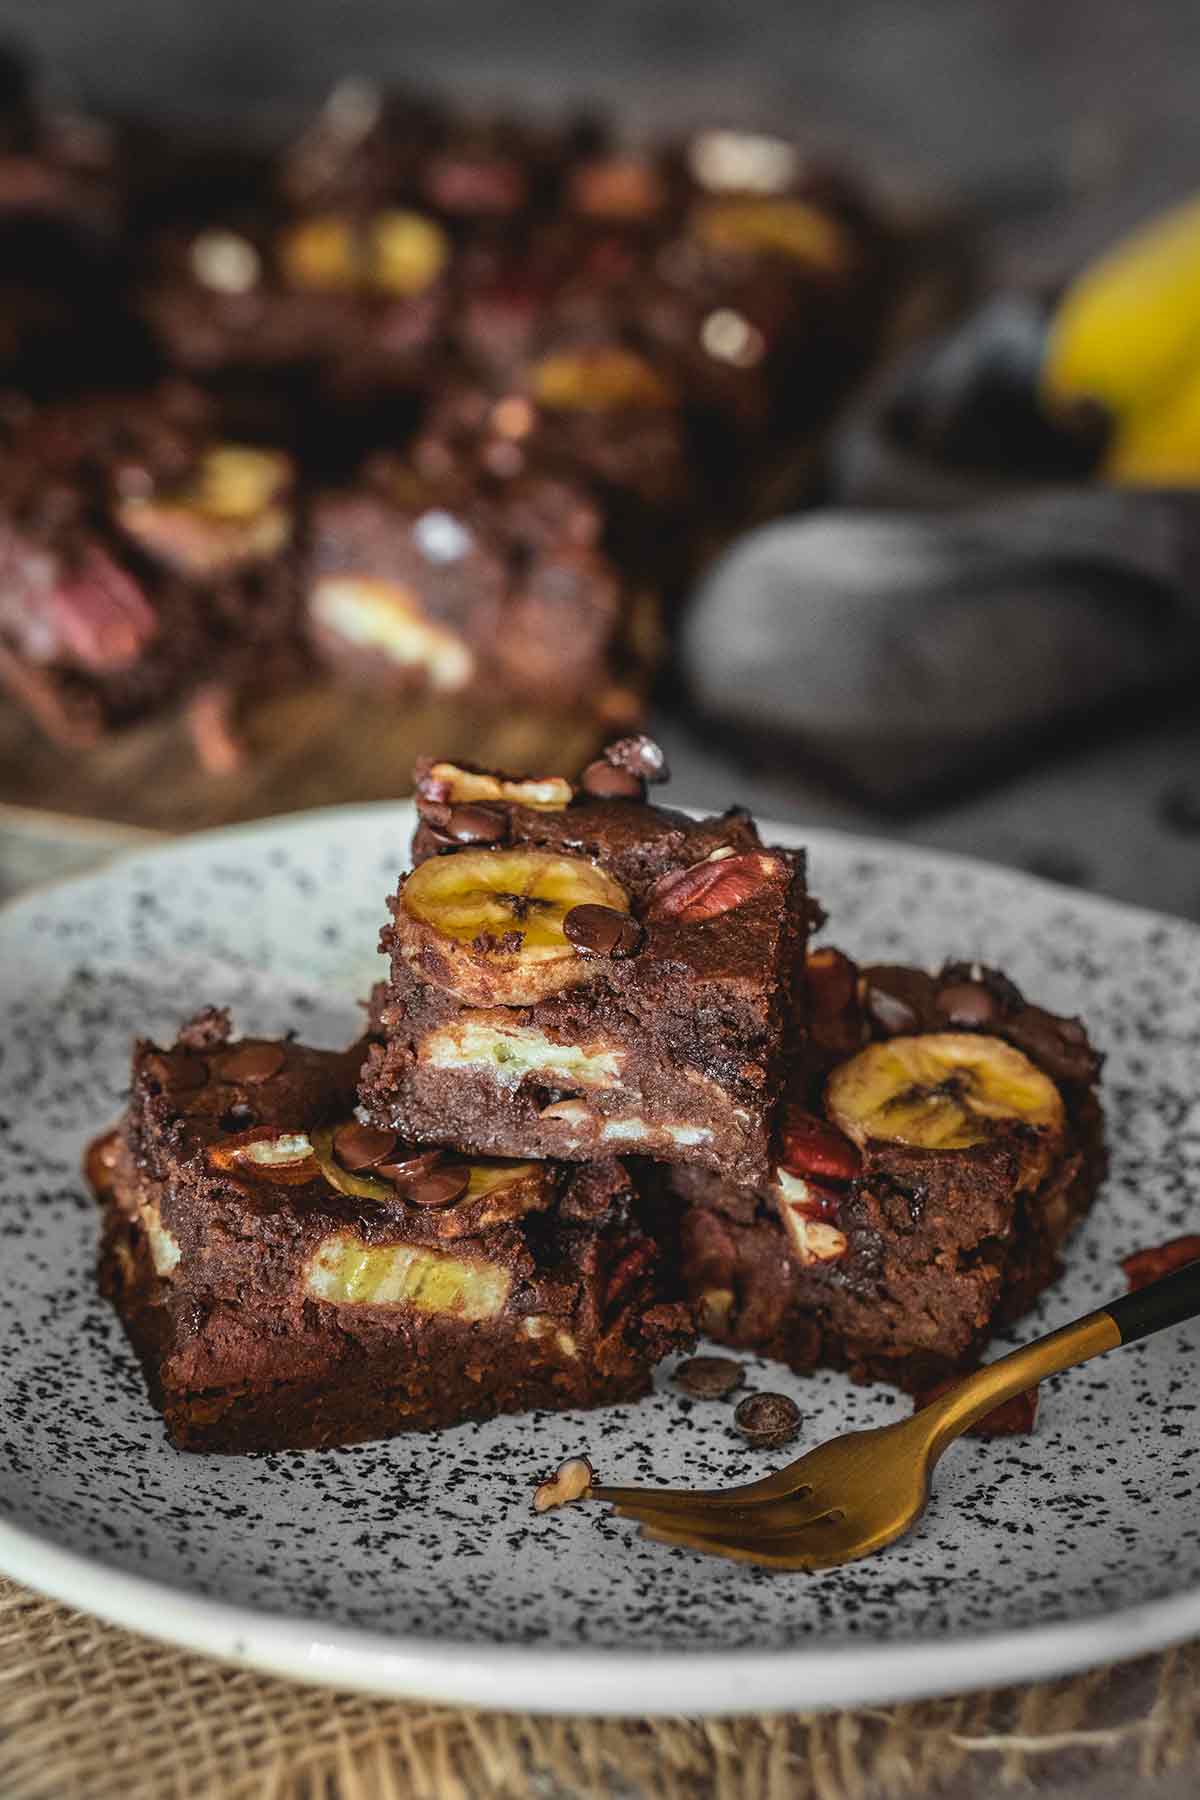 Lentil brownies with chocolate and banana